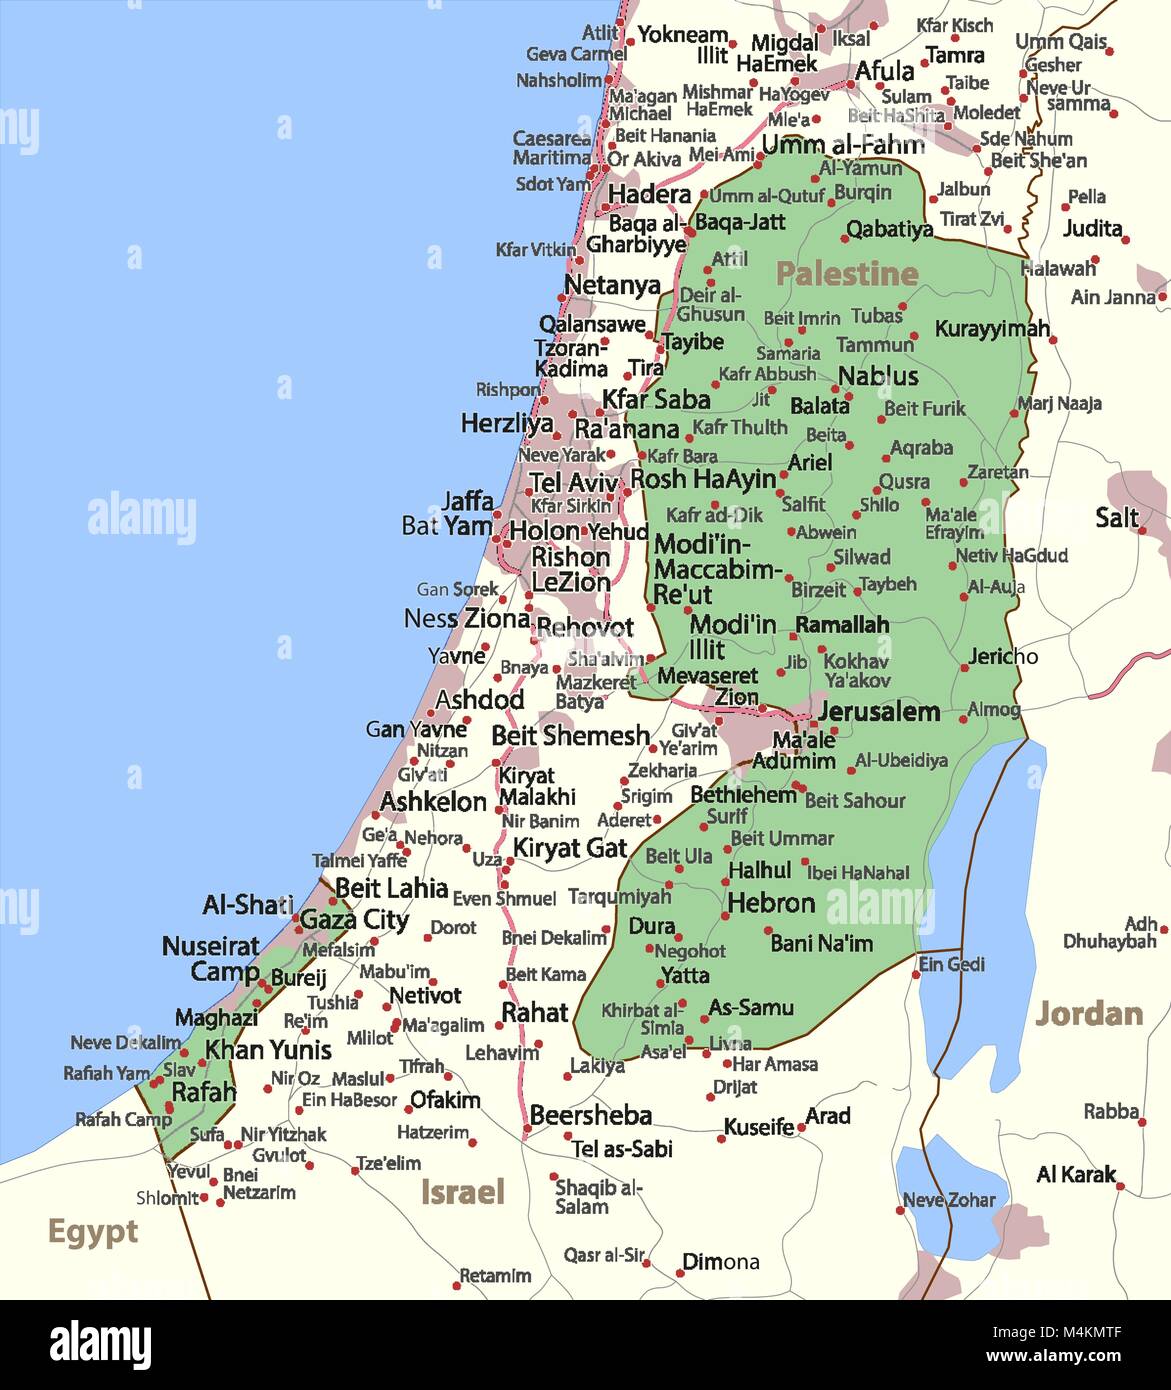 Map of Palestine. Shows country borders, urban areas, place names and ...